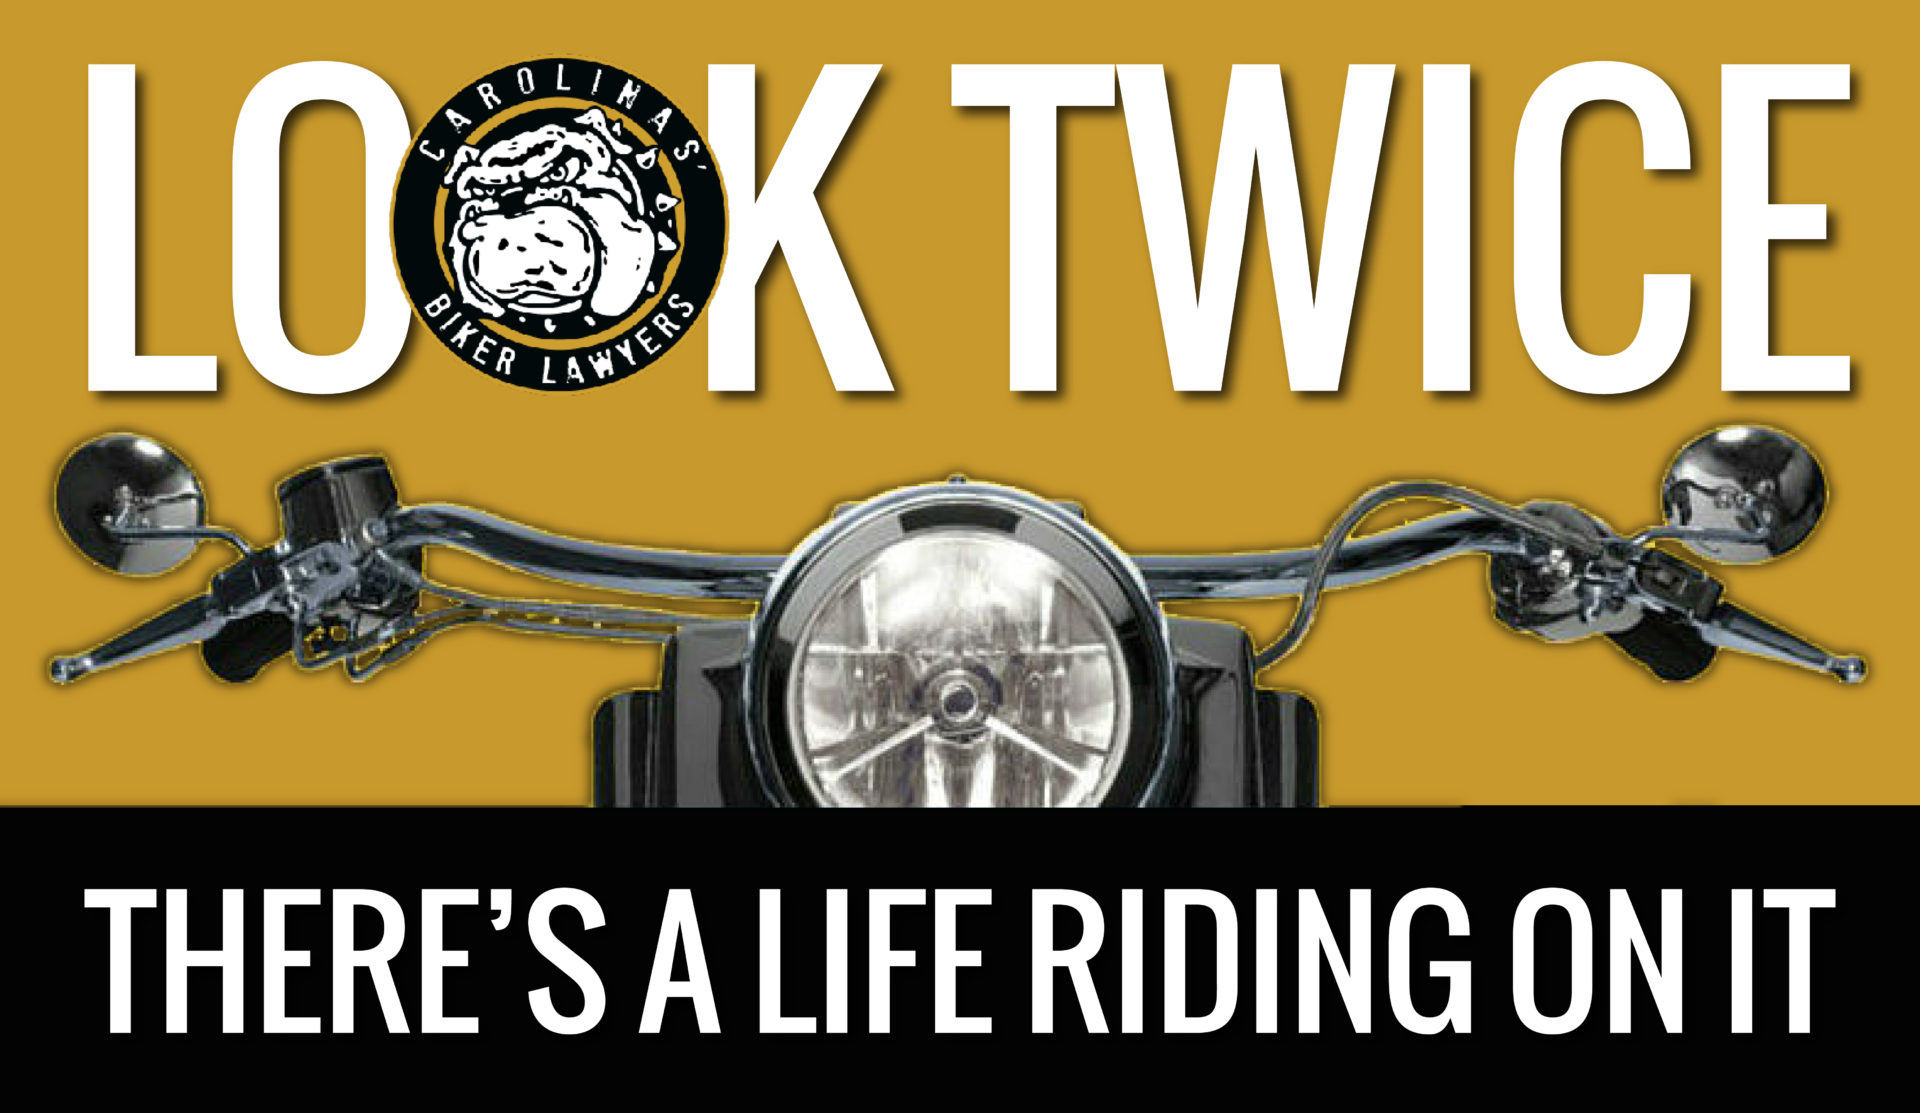 Look Twice - There's a life riding on it